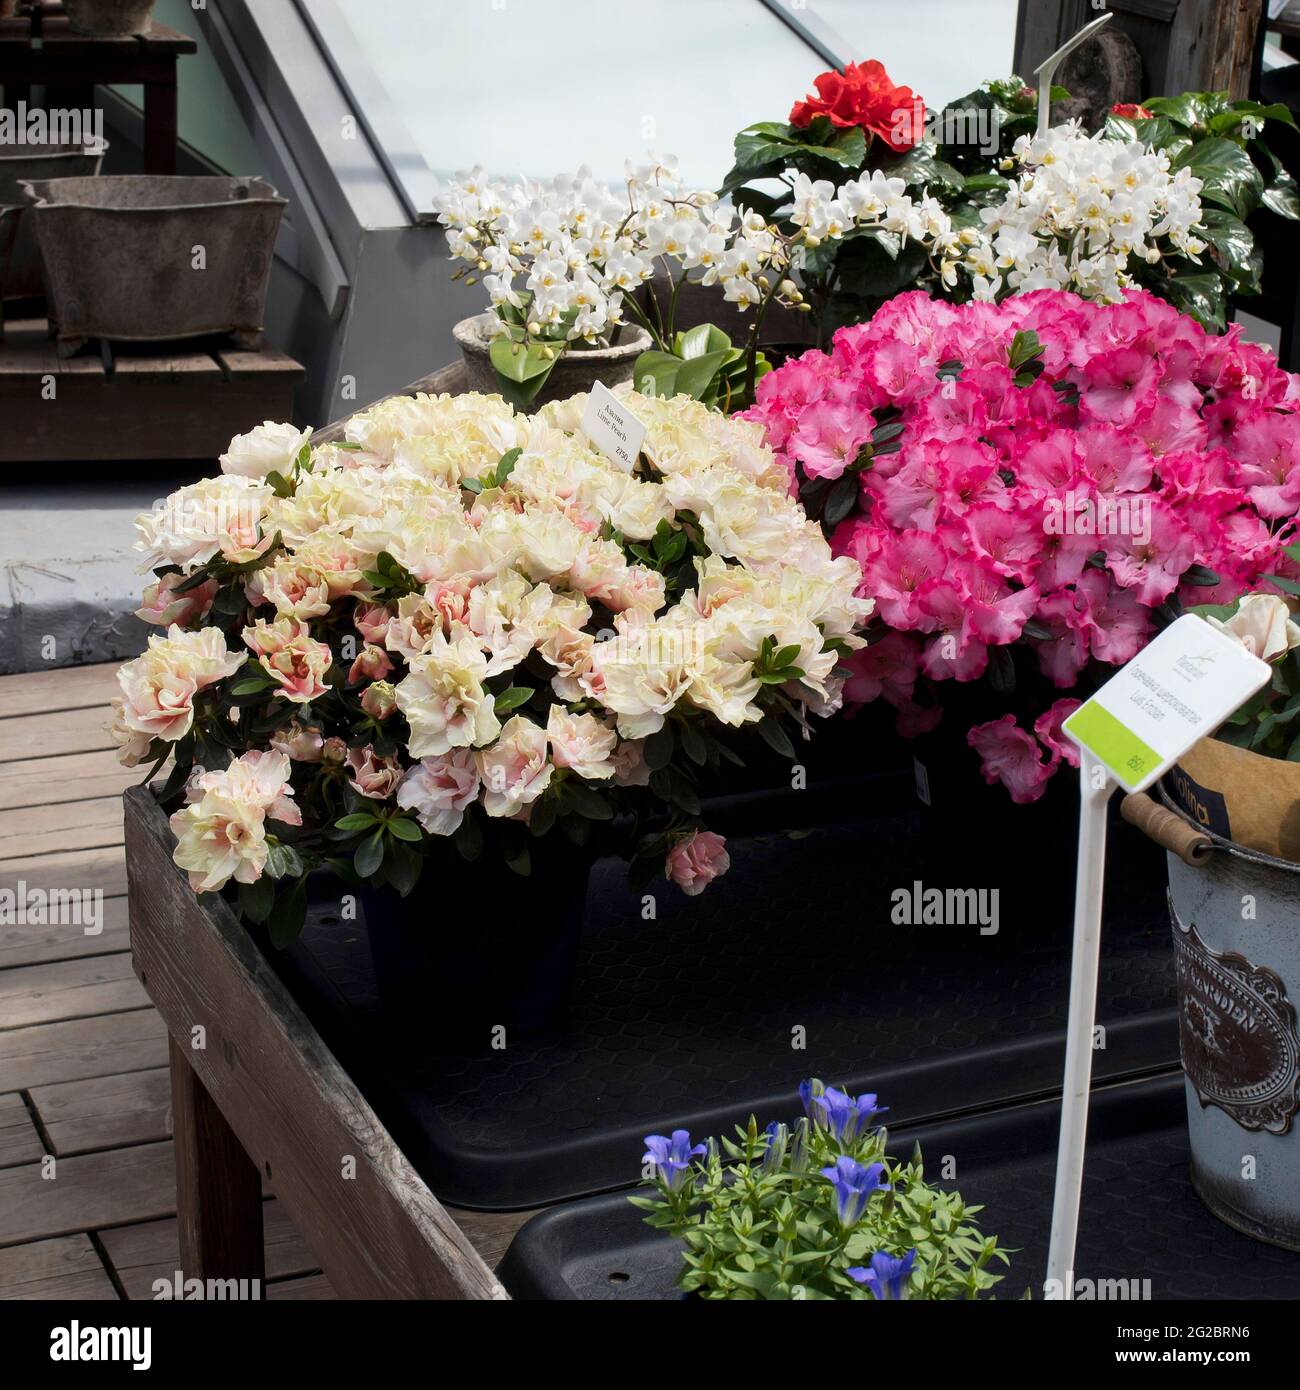 Moscow, Russia - 21 May, 2021, Flower shop. Gentiana scabra, Azalea Lime Peach, white orchids and rhododendrons in terracotta pots as garden decoratio Stock Photo